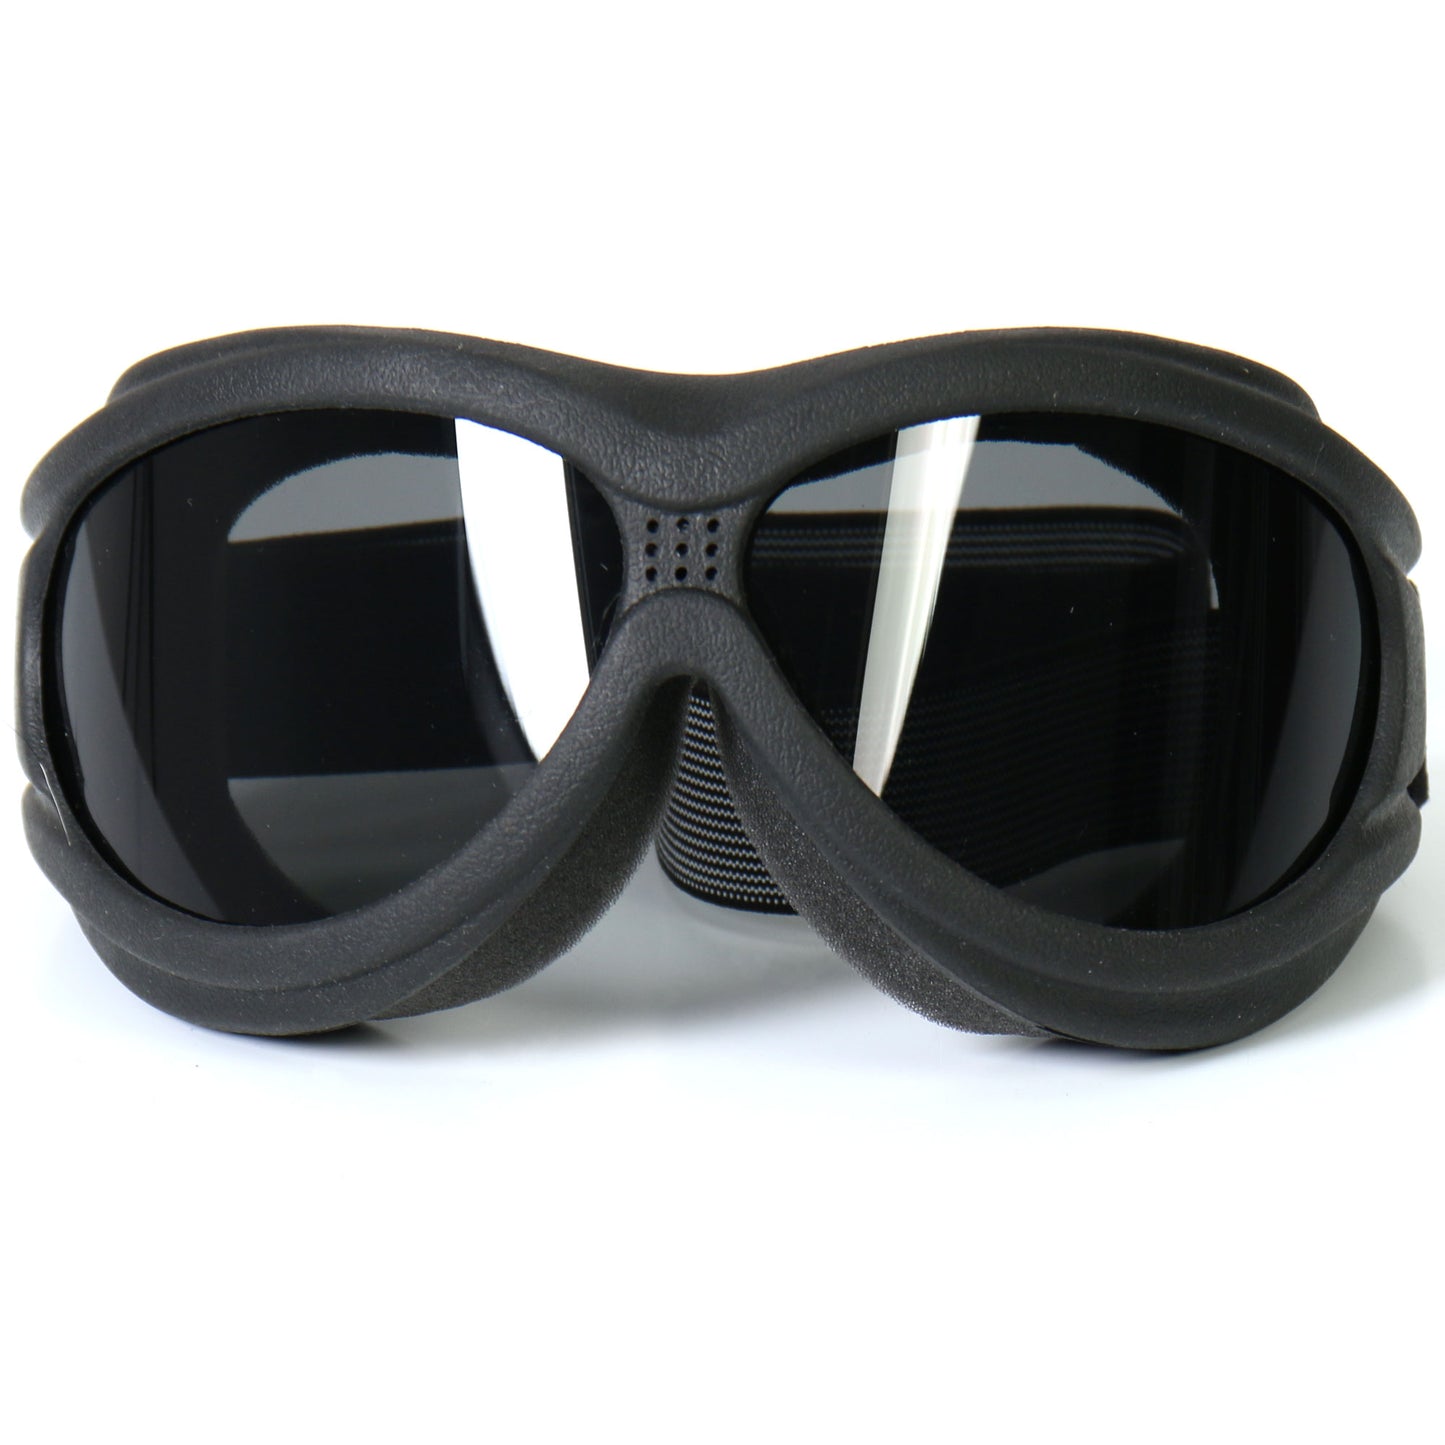 Hot Leathers SGG1001 Big Ben Riding Goggles with Smoke Lenses